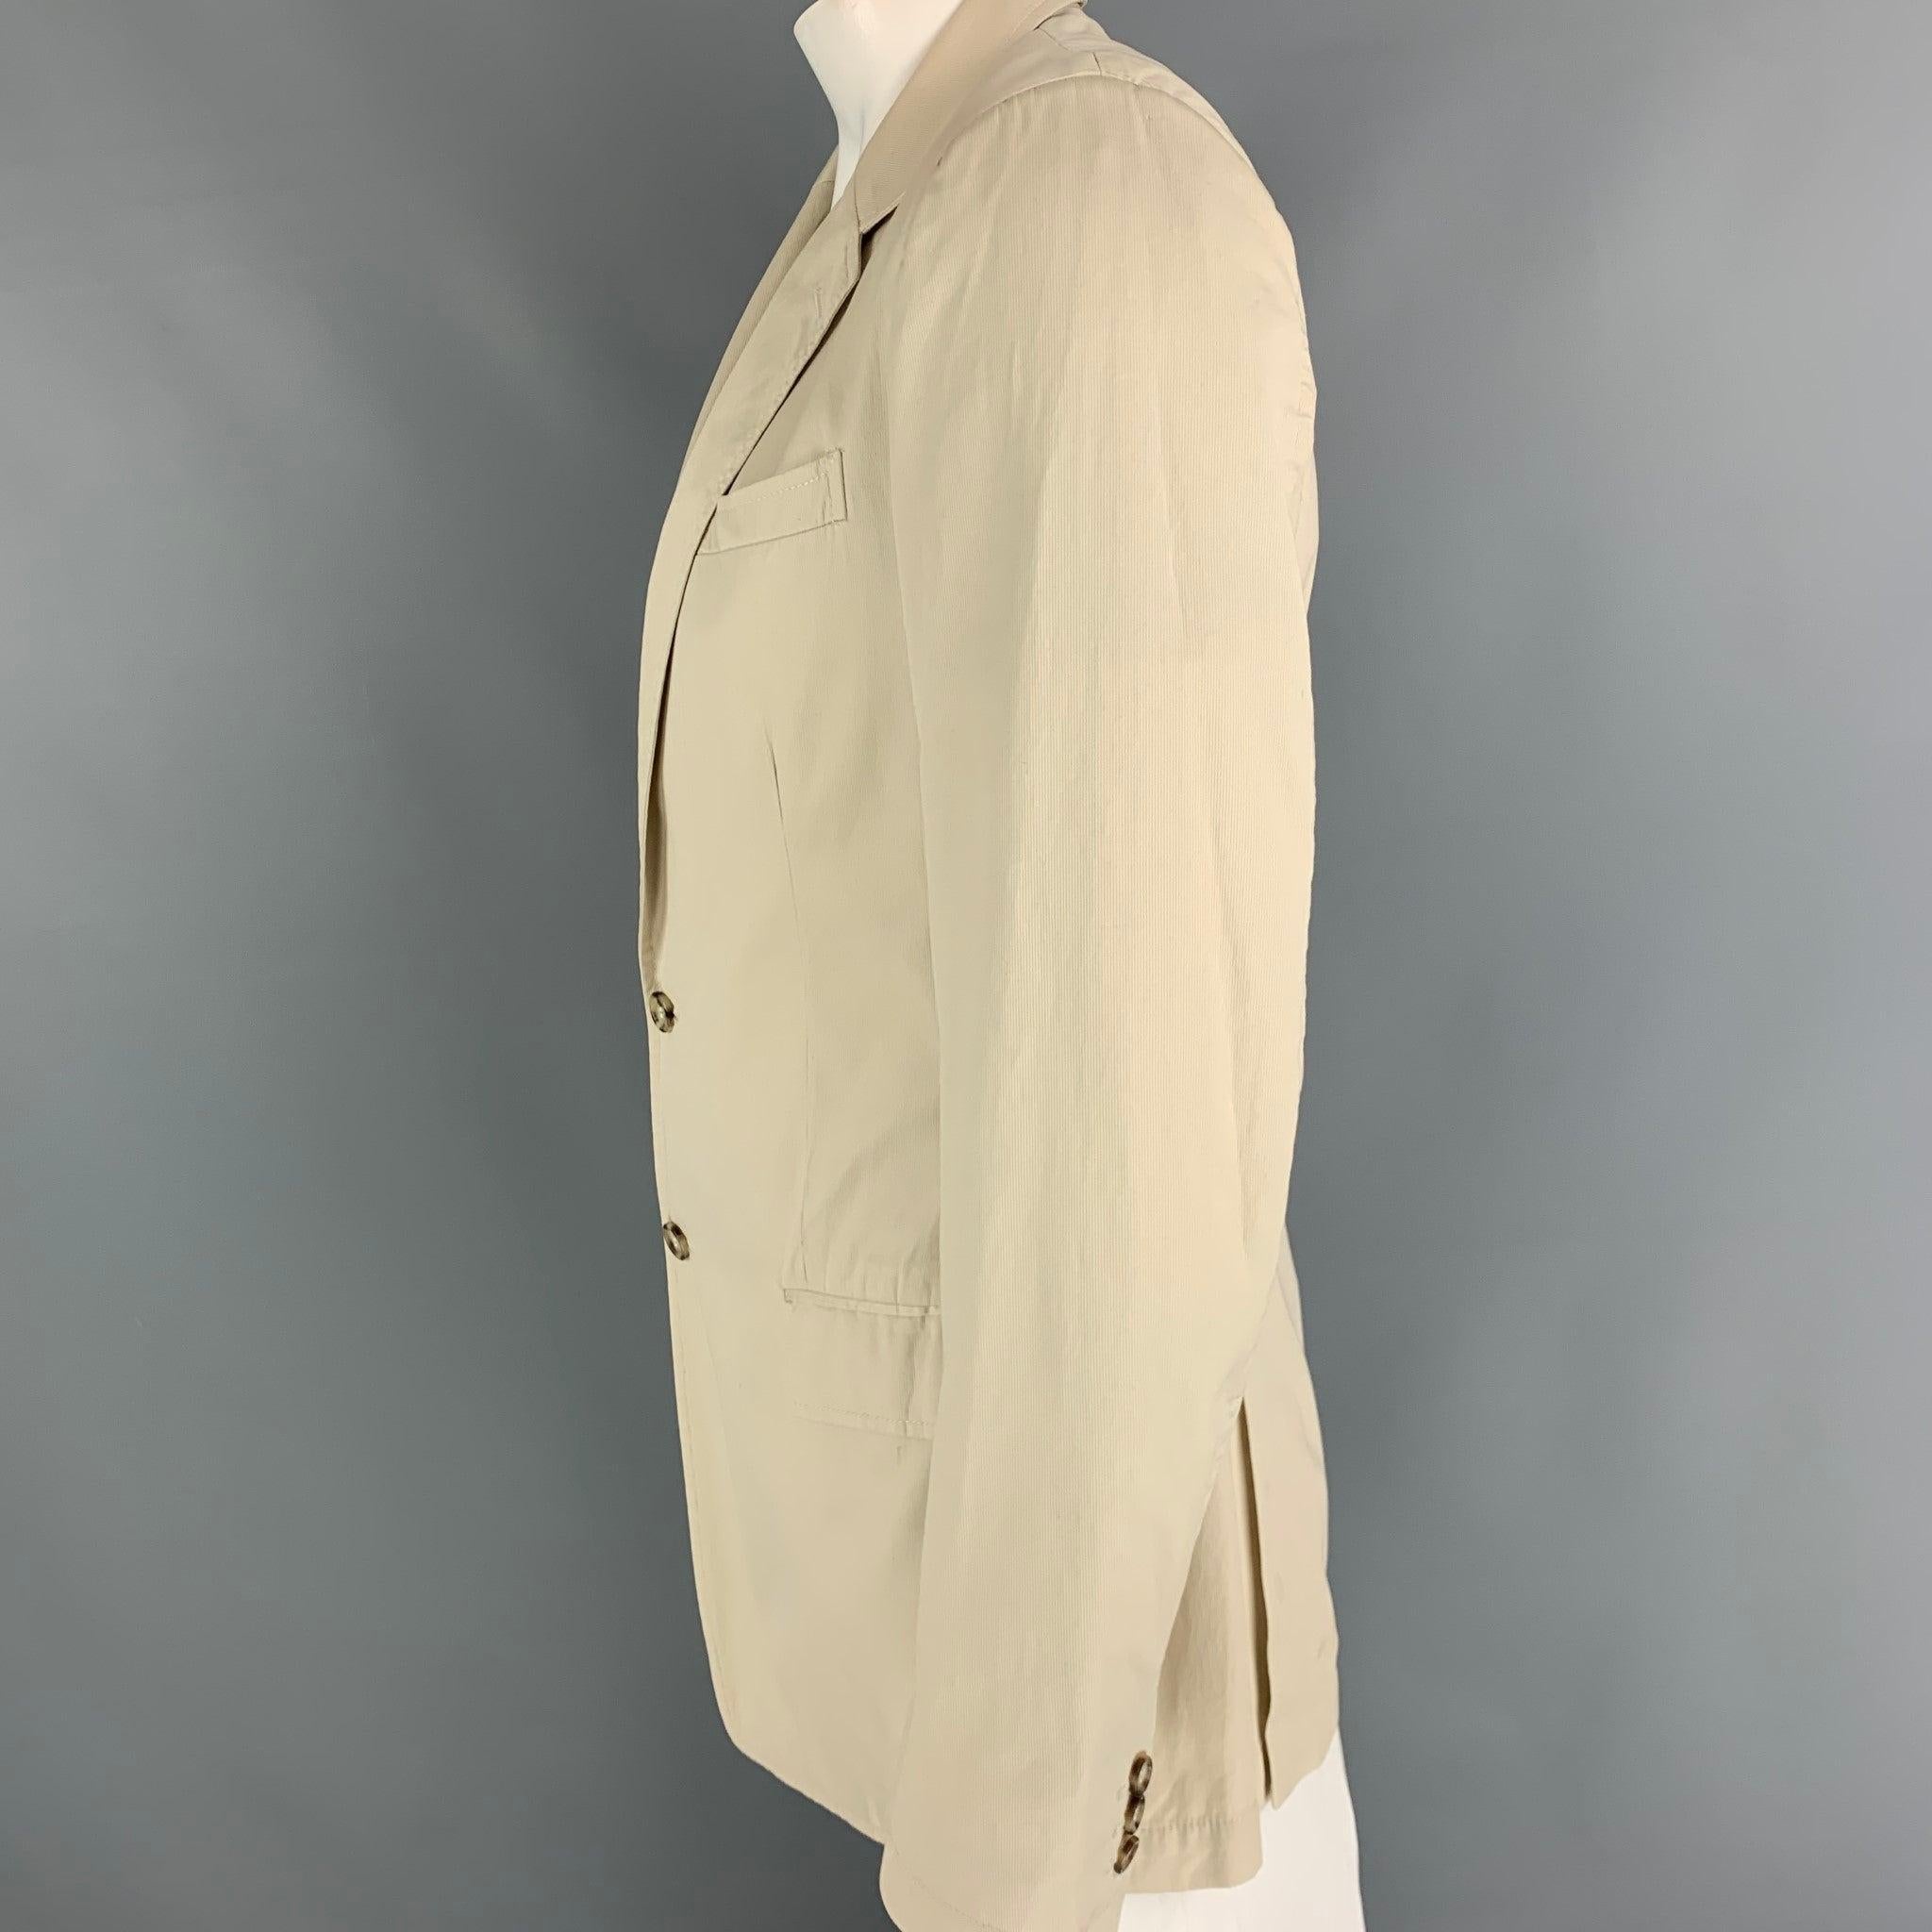 MIU MIU 100% cotton sports coat comes in Beige with a peak lapel,single breasted,double tonal button front.Excellent Pre-Owned Condition.  

Marked:   52 

Measurements: 
 
Shoulder:17 InchesChest:42 InchesSleeve:26/ InchesLength:
31/ Inches
  
  
